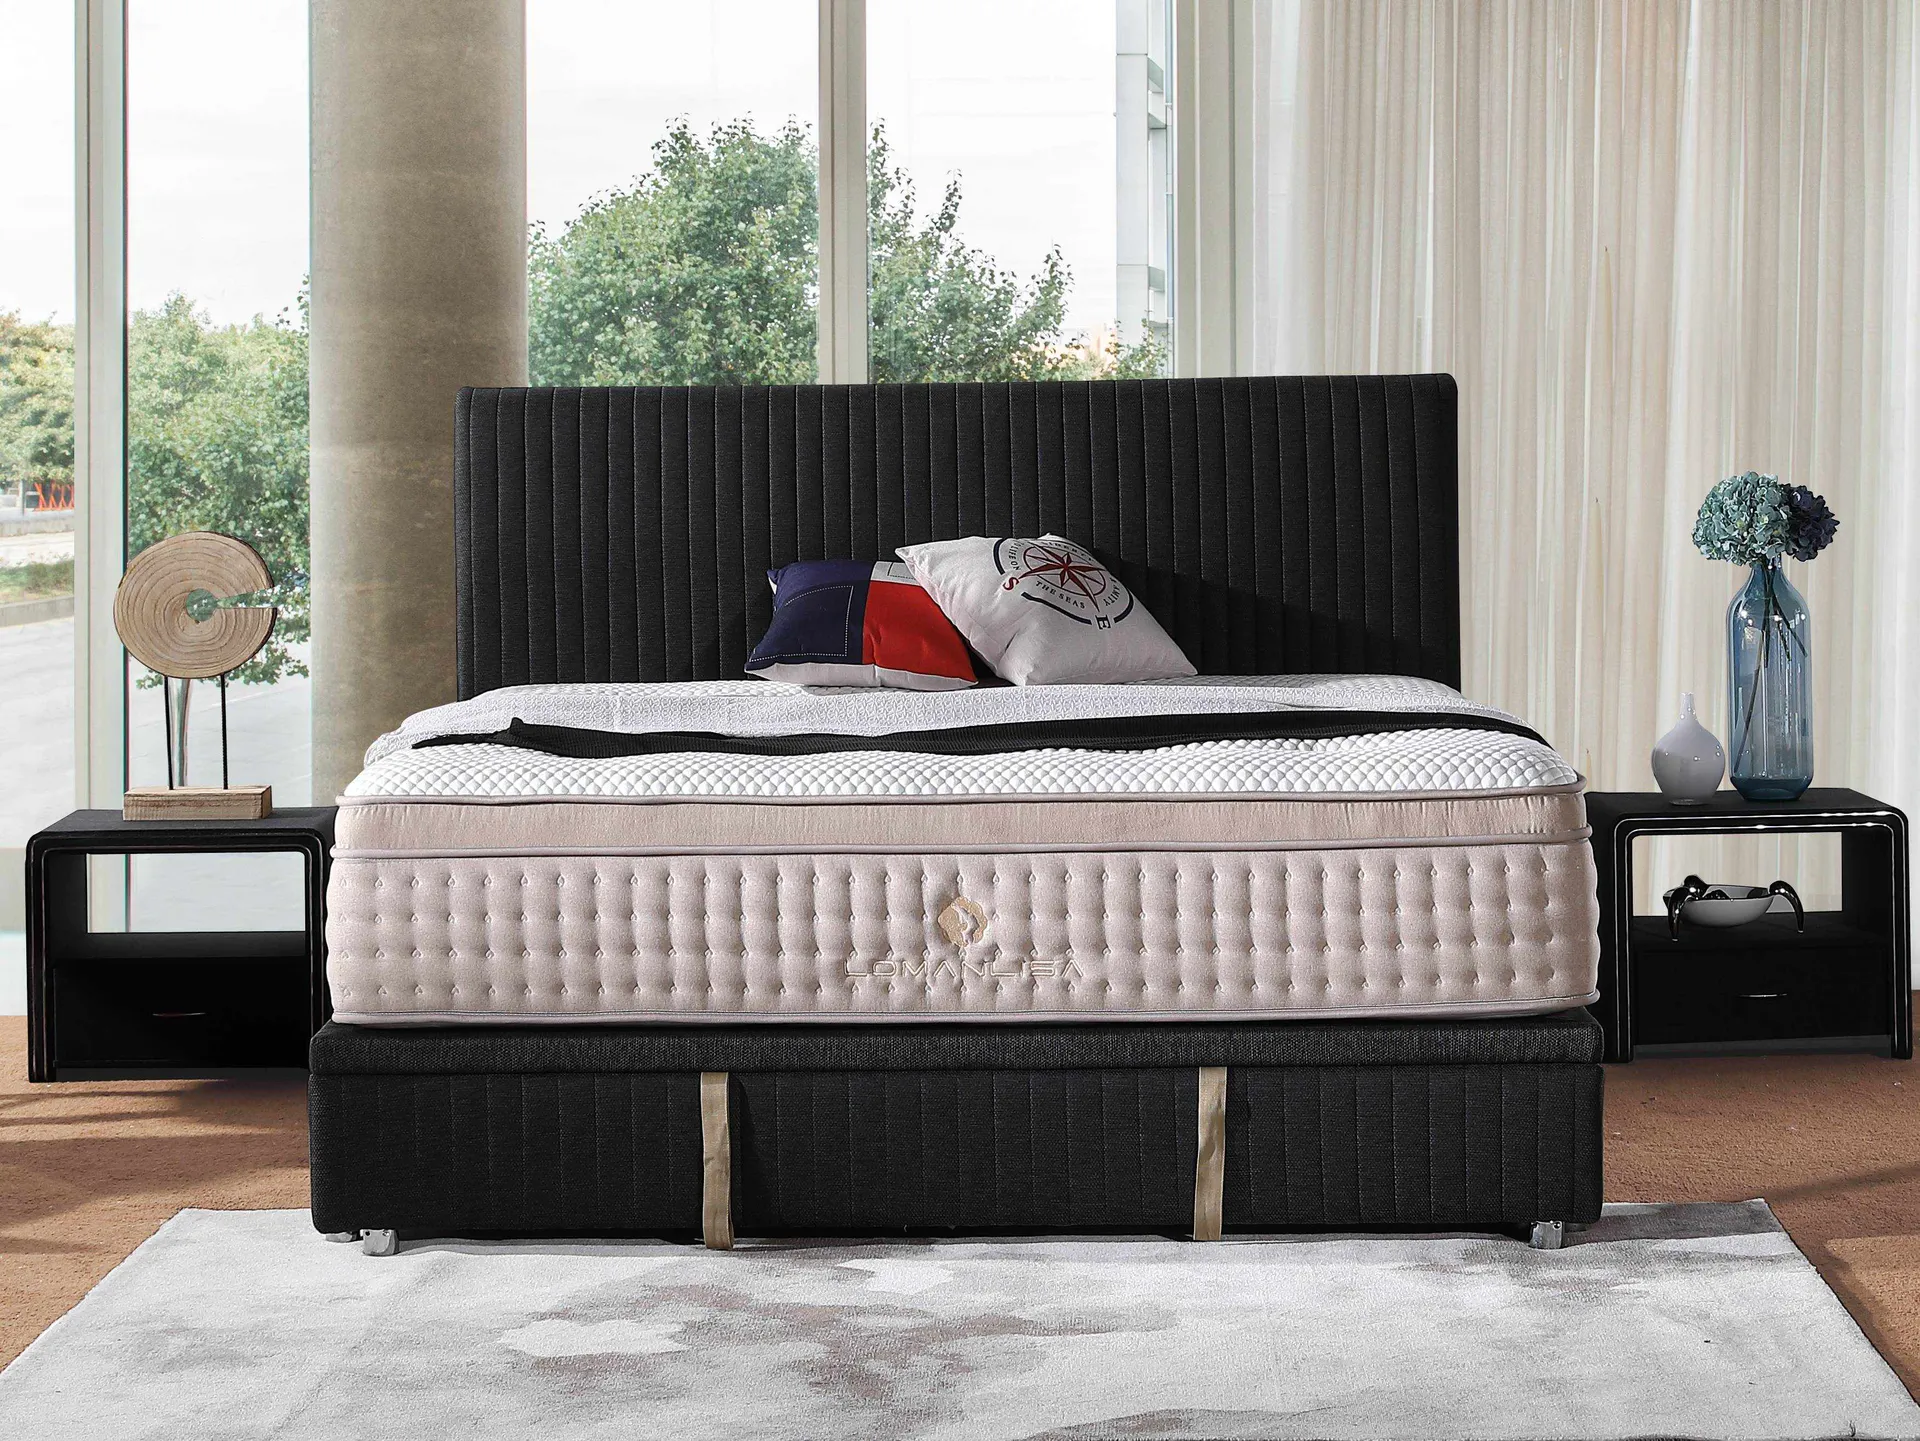 34PD-02 | 2018 Beautiful Design Hand Tufted Gel Memory Foam Double Layers Pocket Spring Mattress with High Quality Knitted Fabri